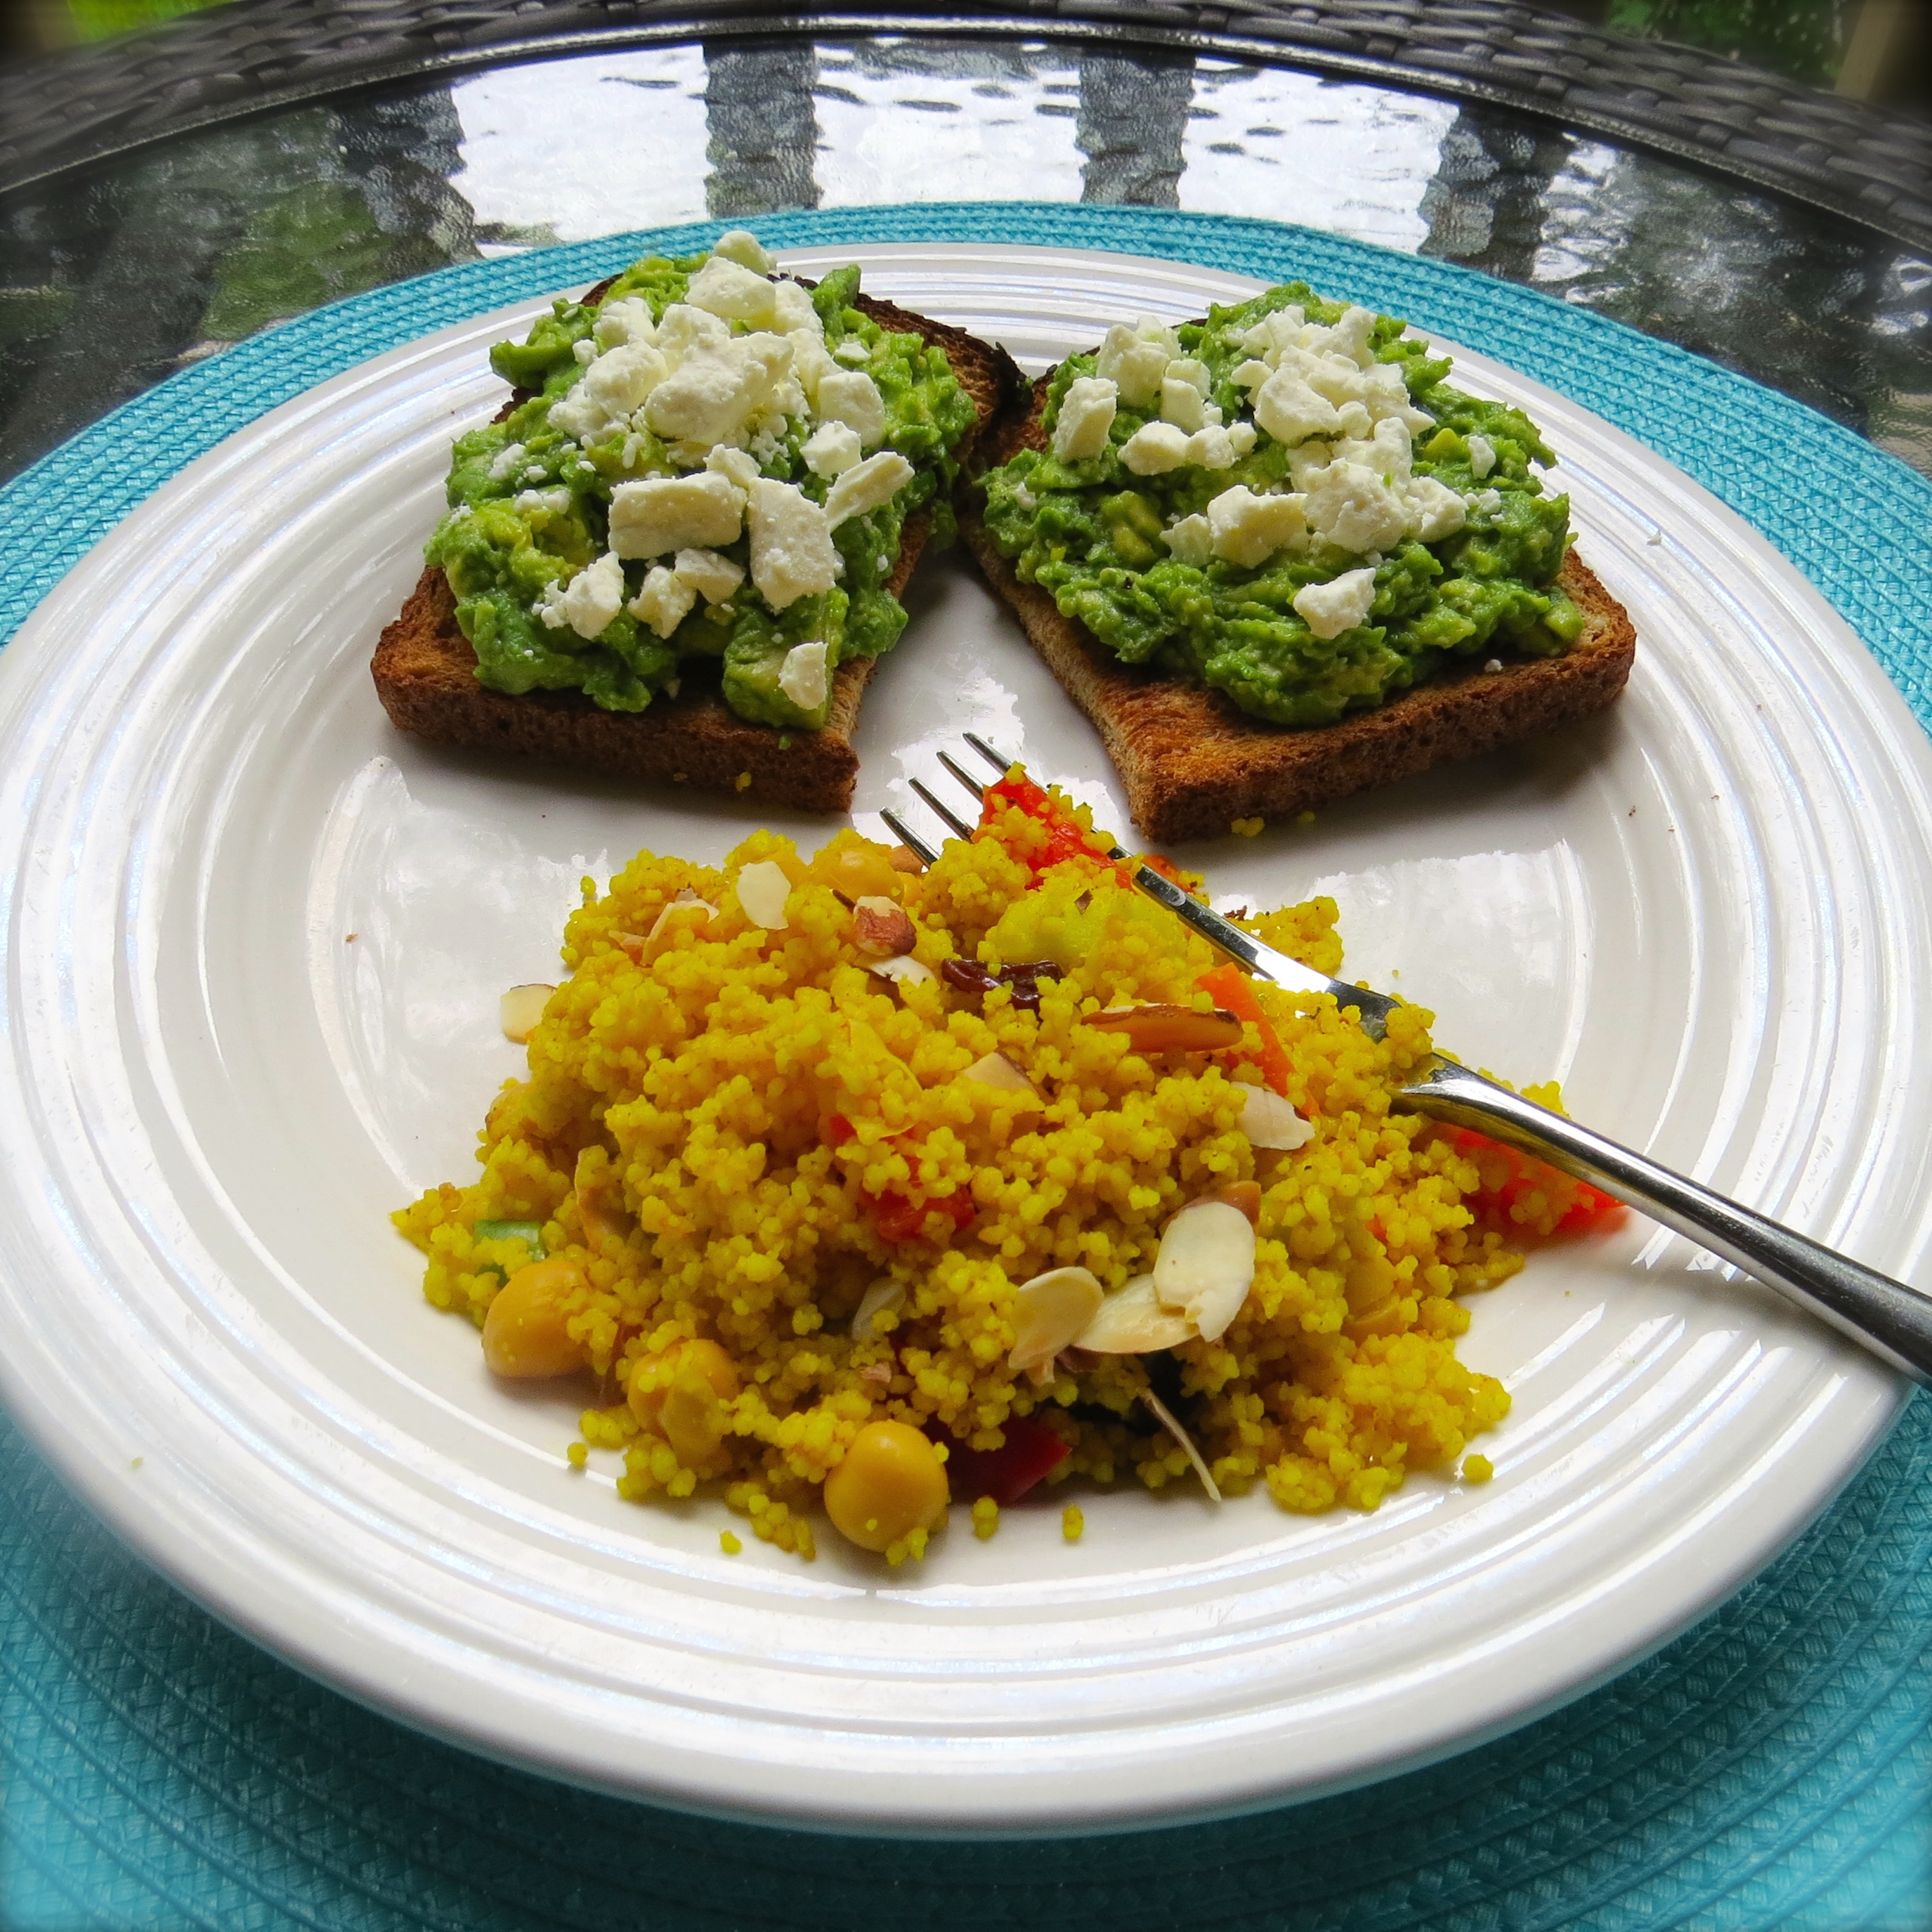 Quite a lunch - Couscous Salad and Stuff-on-Toast